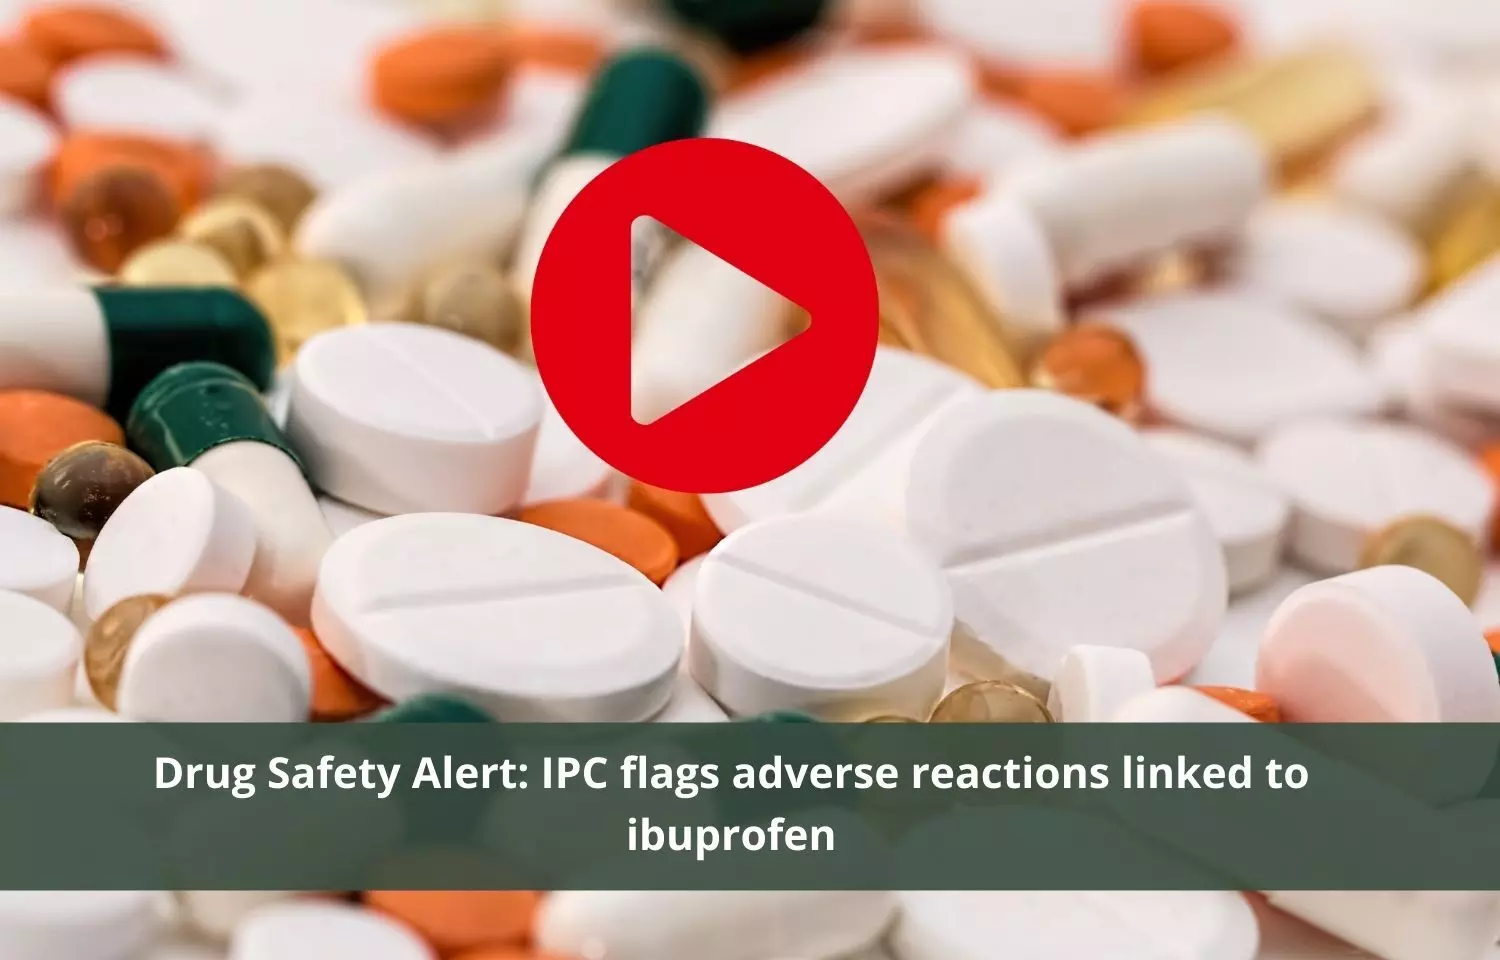 IPC flags adverse reactions linked to Ibuprofen